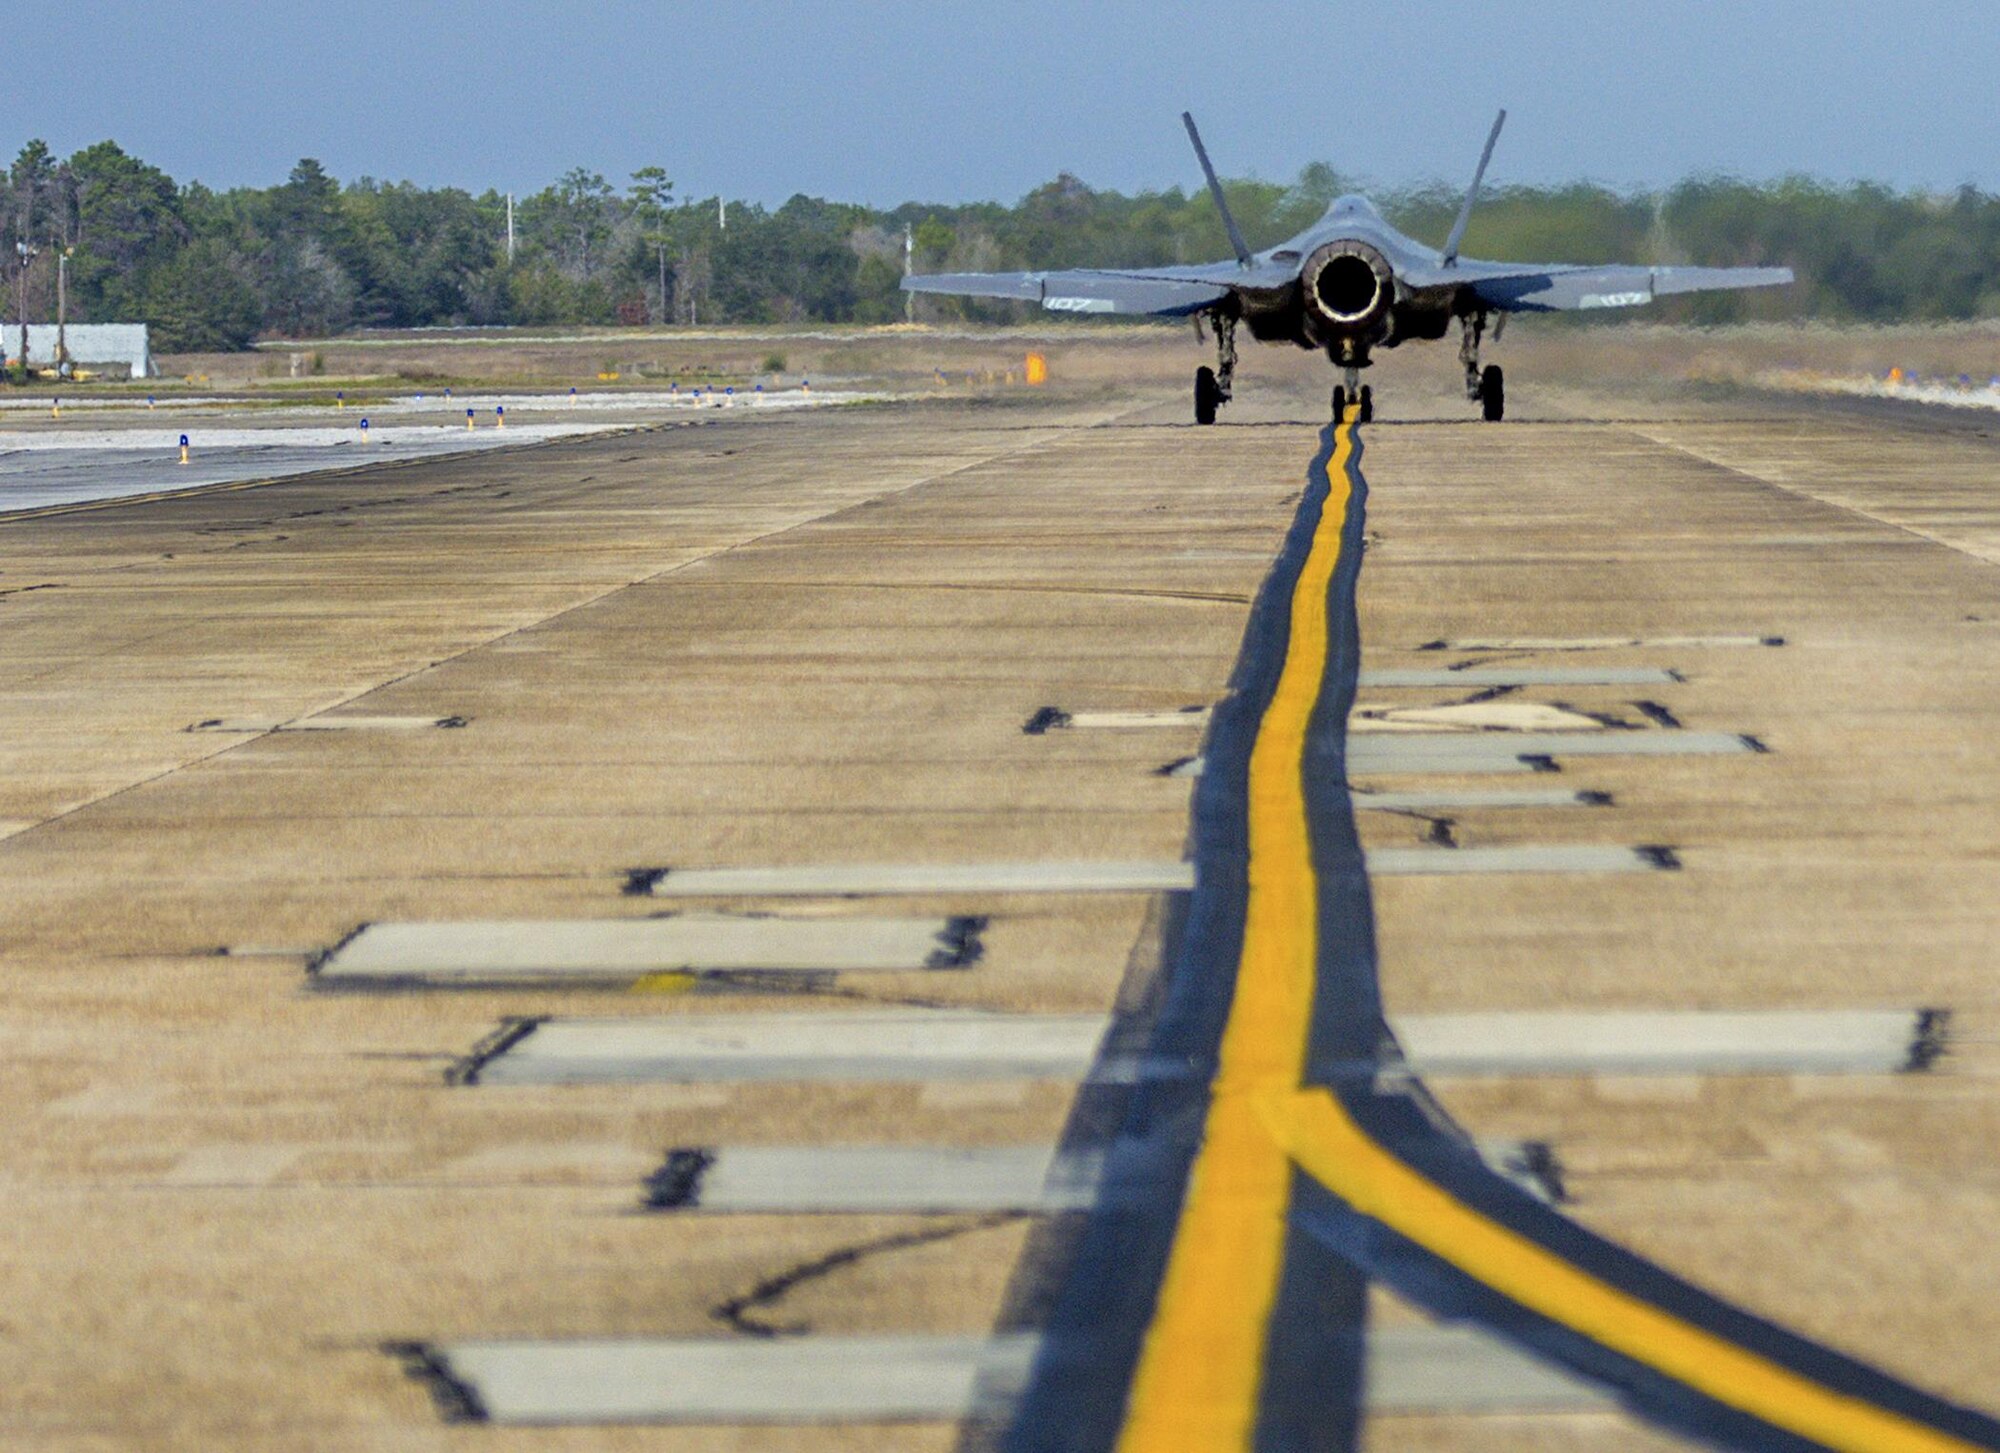 An F-35C Lightning II taxis down the flight line Feb. 27 from the F-35 Strike Fighter Squadron at Eglin Air Force Base, Fla. The F-35C variant is a carrier-capable low-observable multi-role fighter aircraft, designed to provide unmatched airborne power projection from the sea. The Navy's joint strike fighter bears structural modifications from other variants, necessitated by the increased resiliency required for carrier operations. (U.S. Air Force photo/Kristin Stewart)